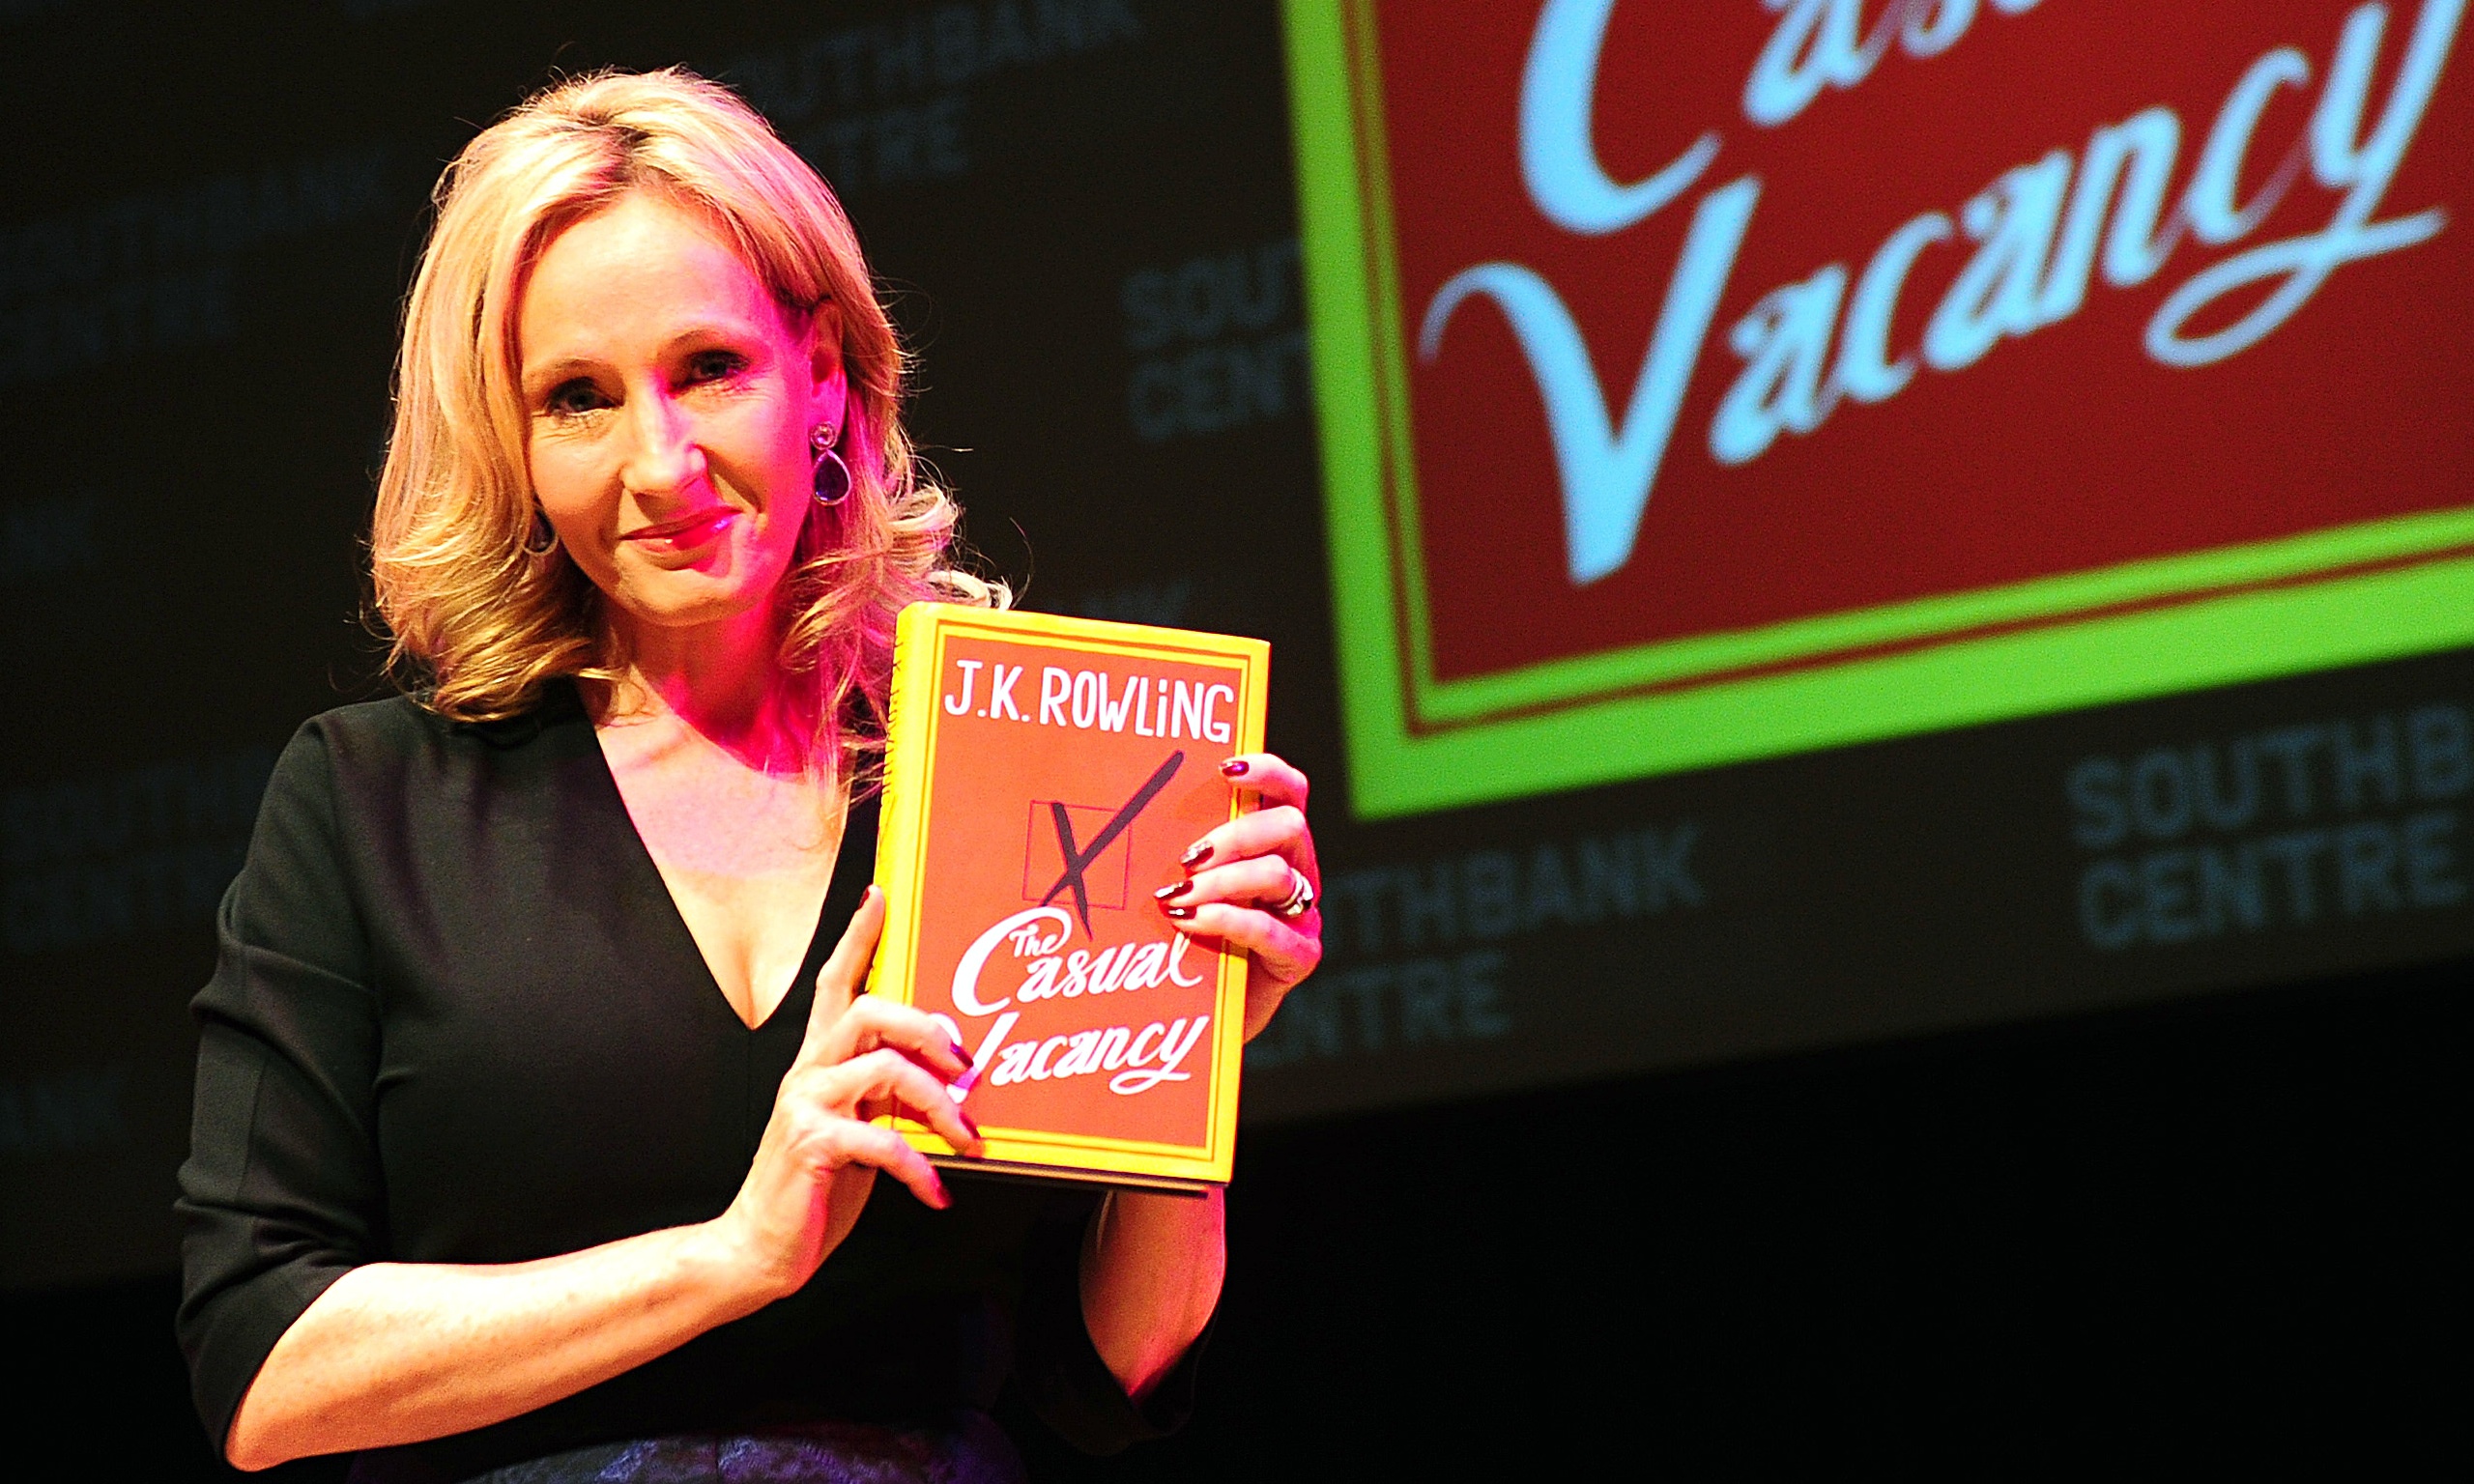 jk rowling books the casual vacancy